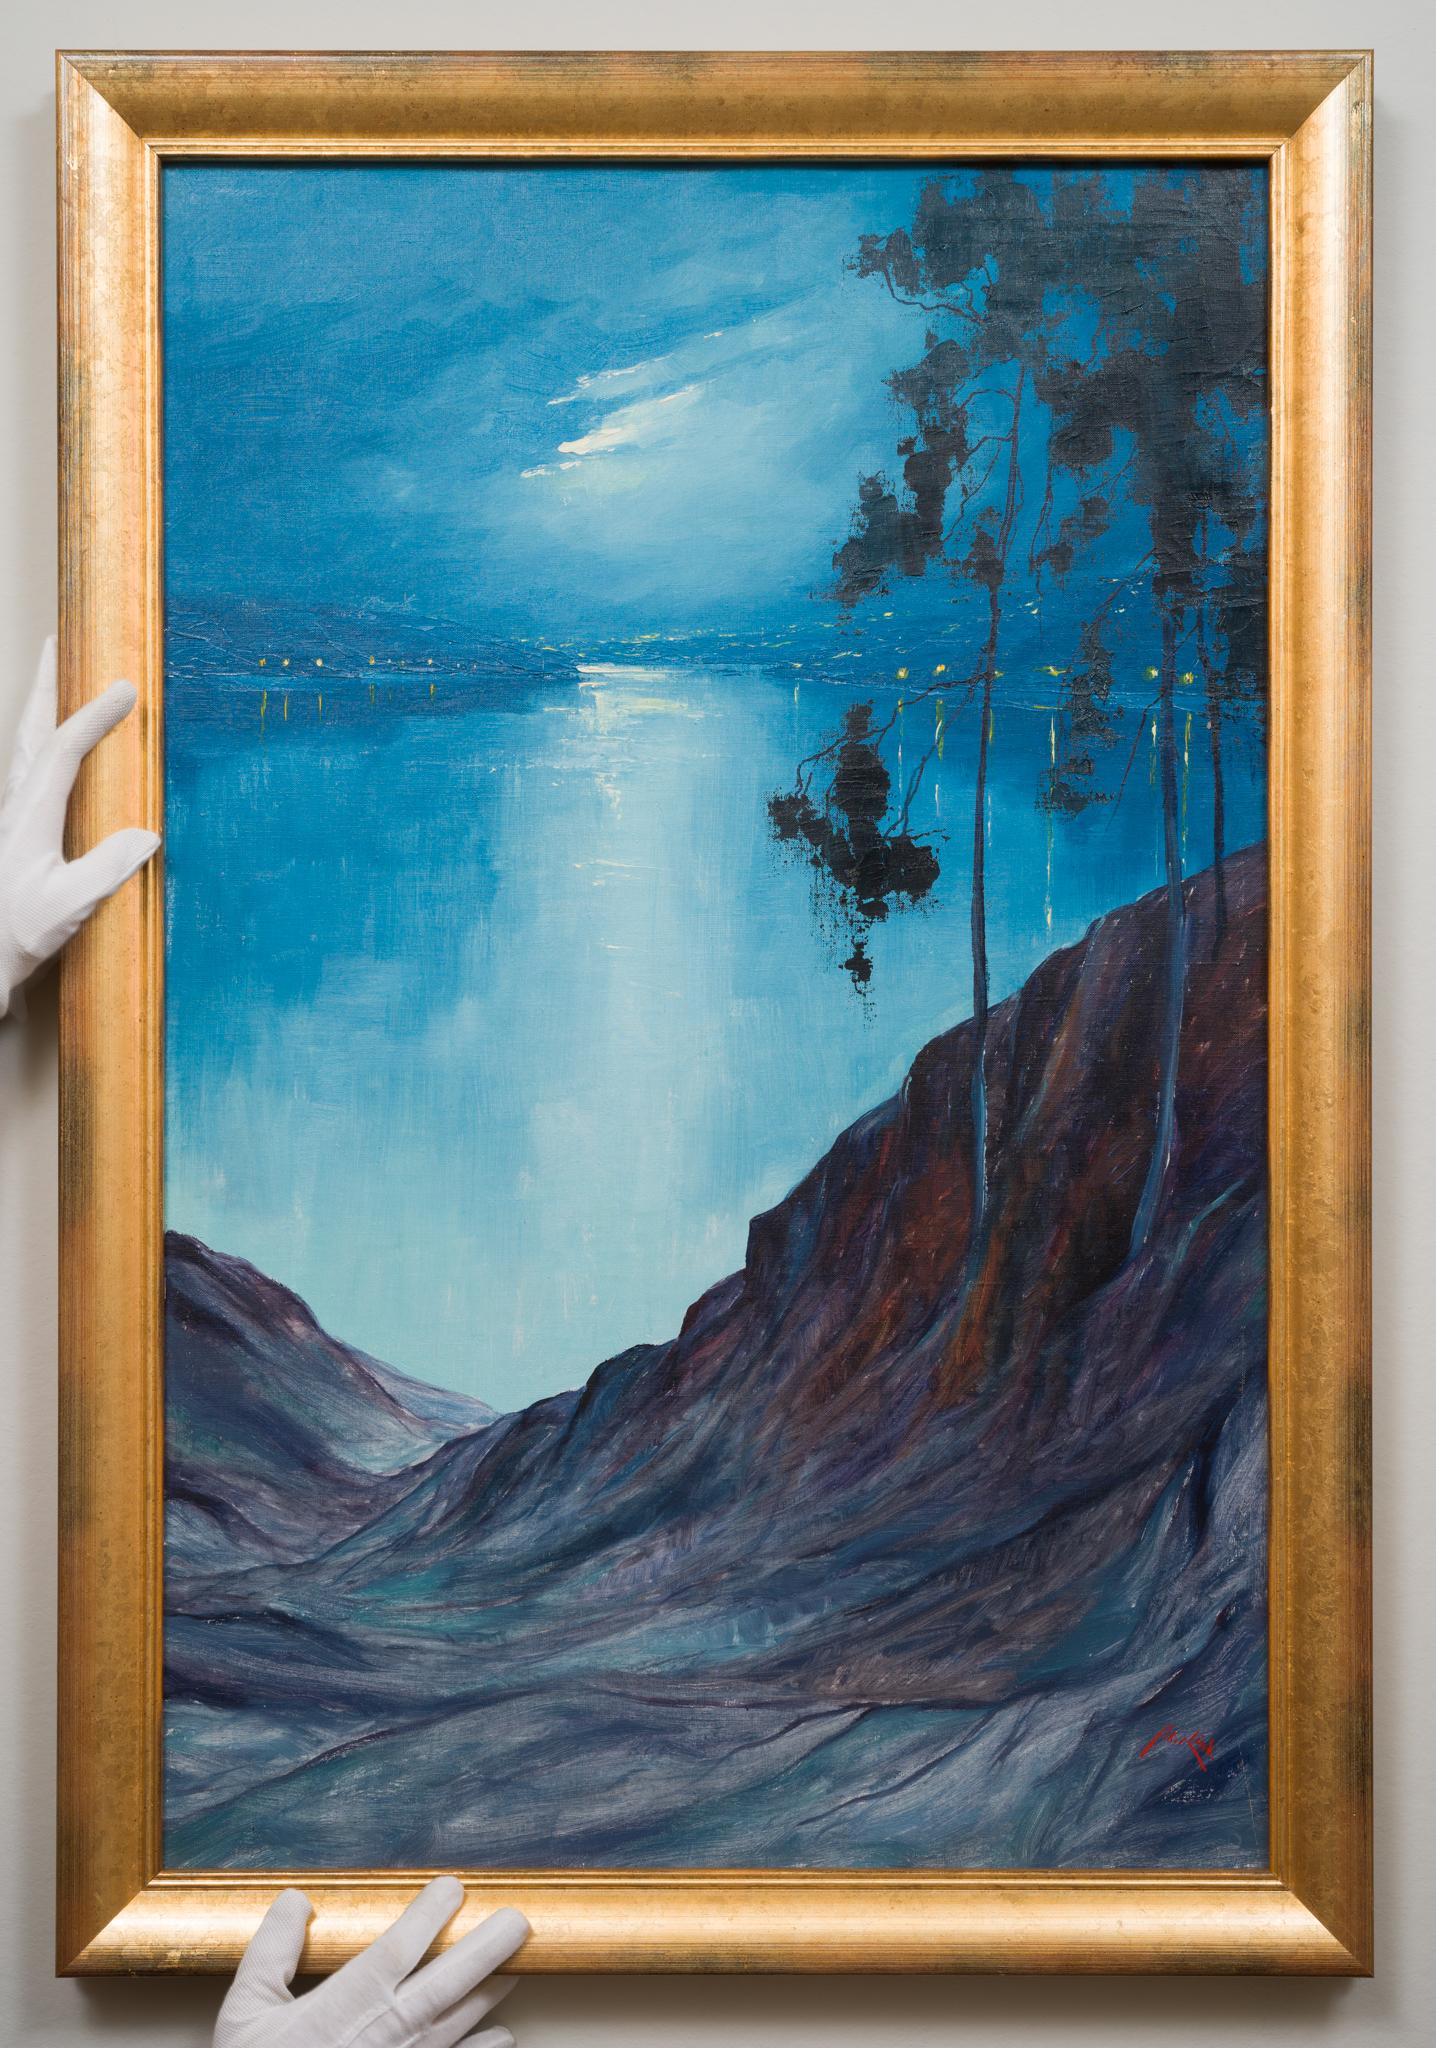 Midnight Reflections From the Artist Lidingö Studio - Painting by Axel Lind